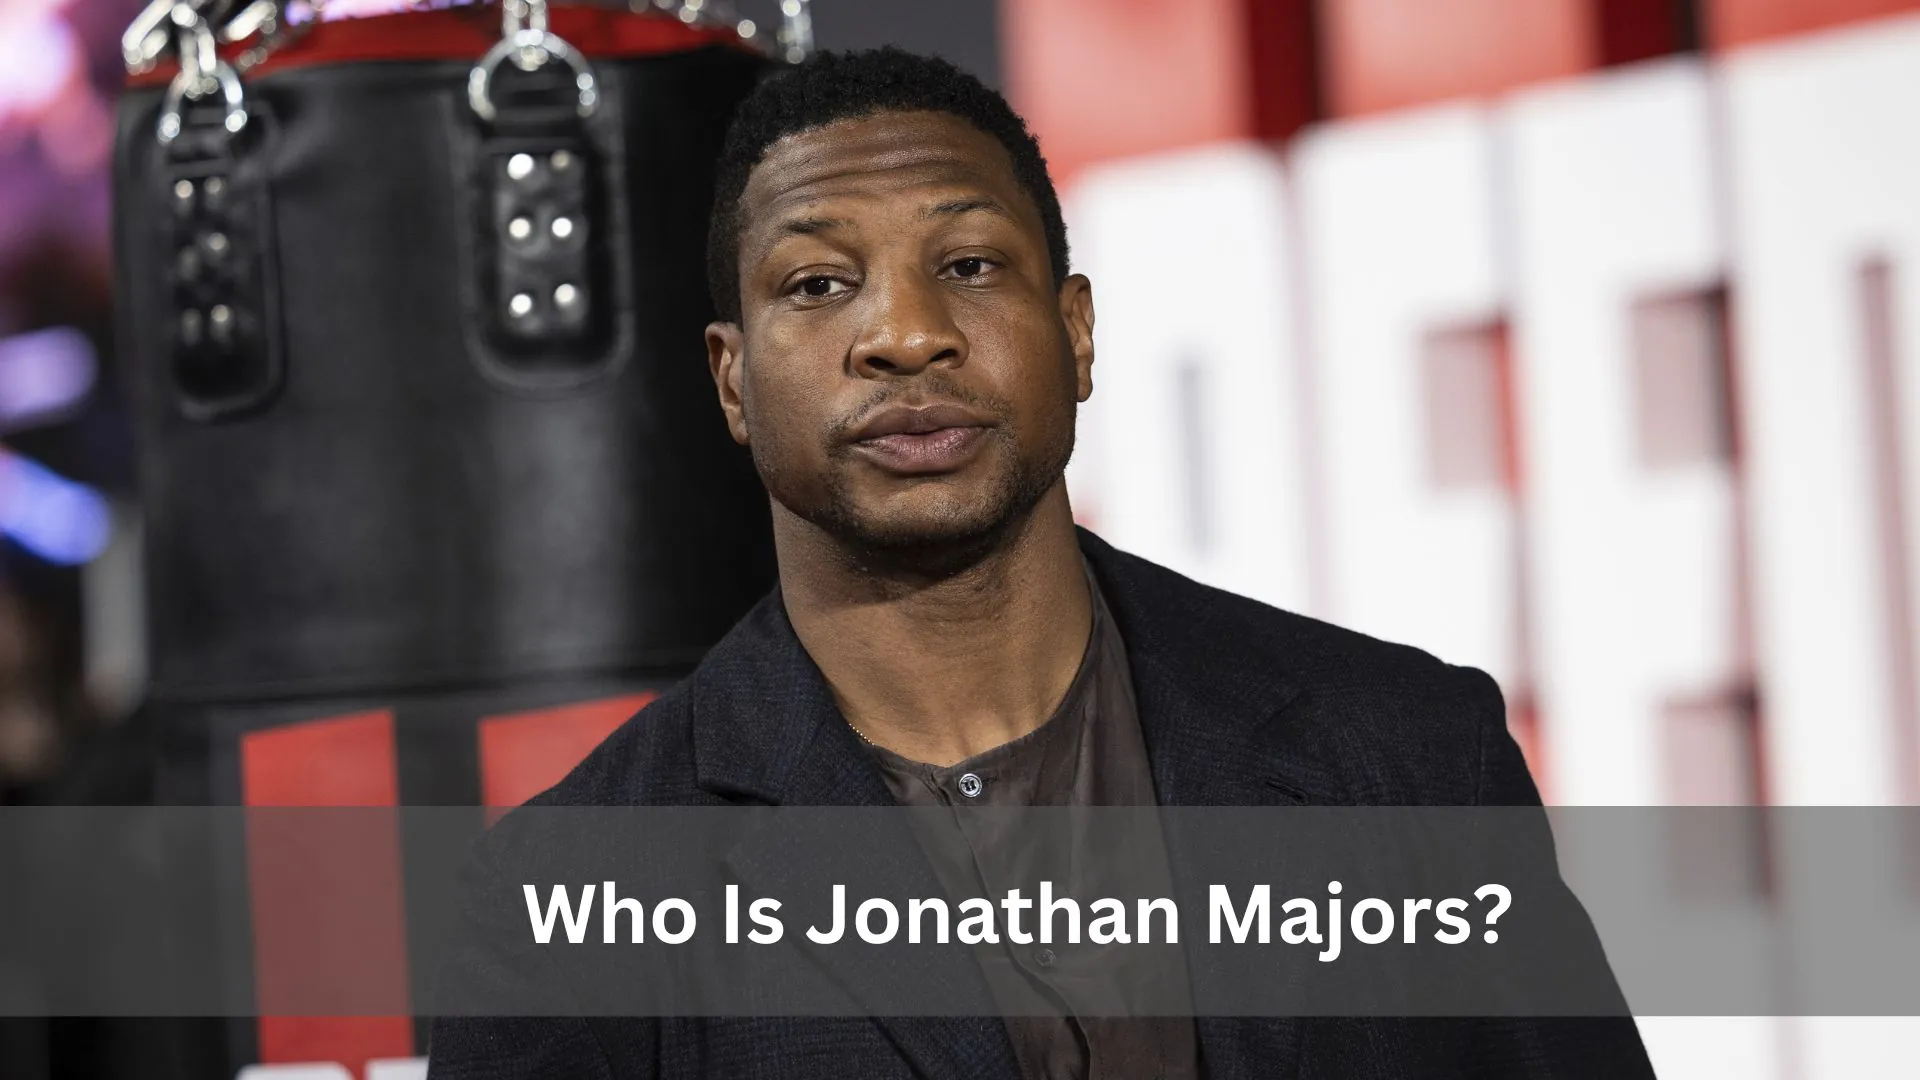 The pod went too deep into Jonathan Majors for no reason hes dressed as a  villain from the anime One Piece because hes starring opposite of Michael  B Jordan a known anime